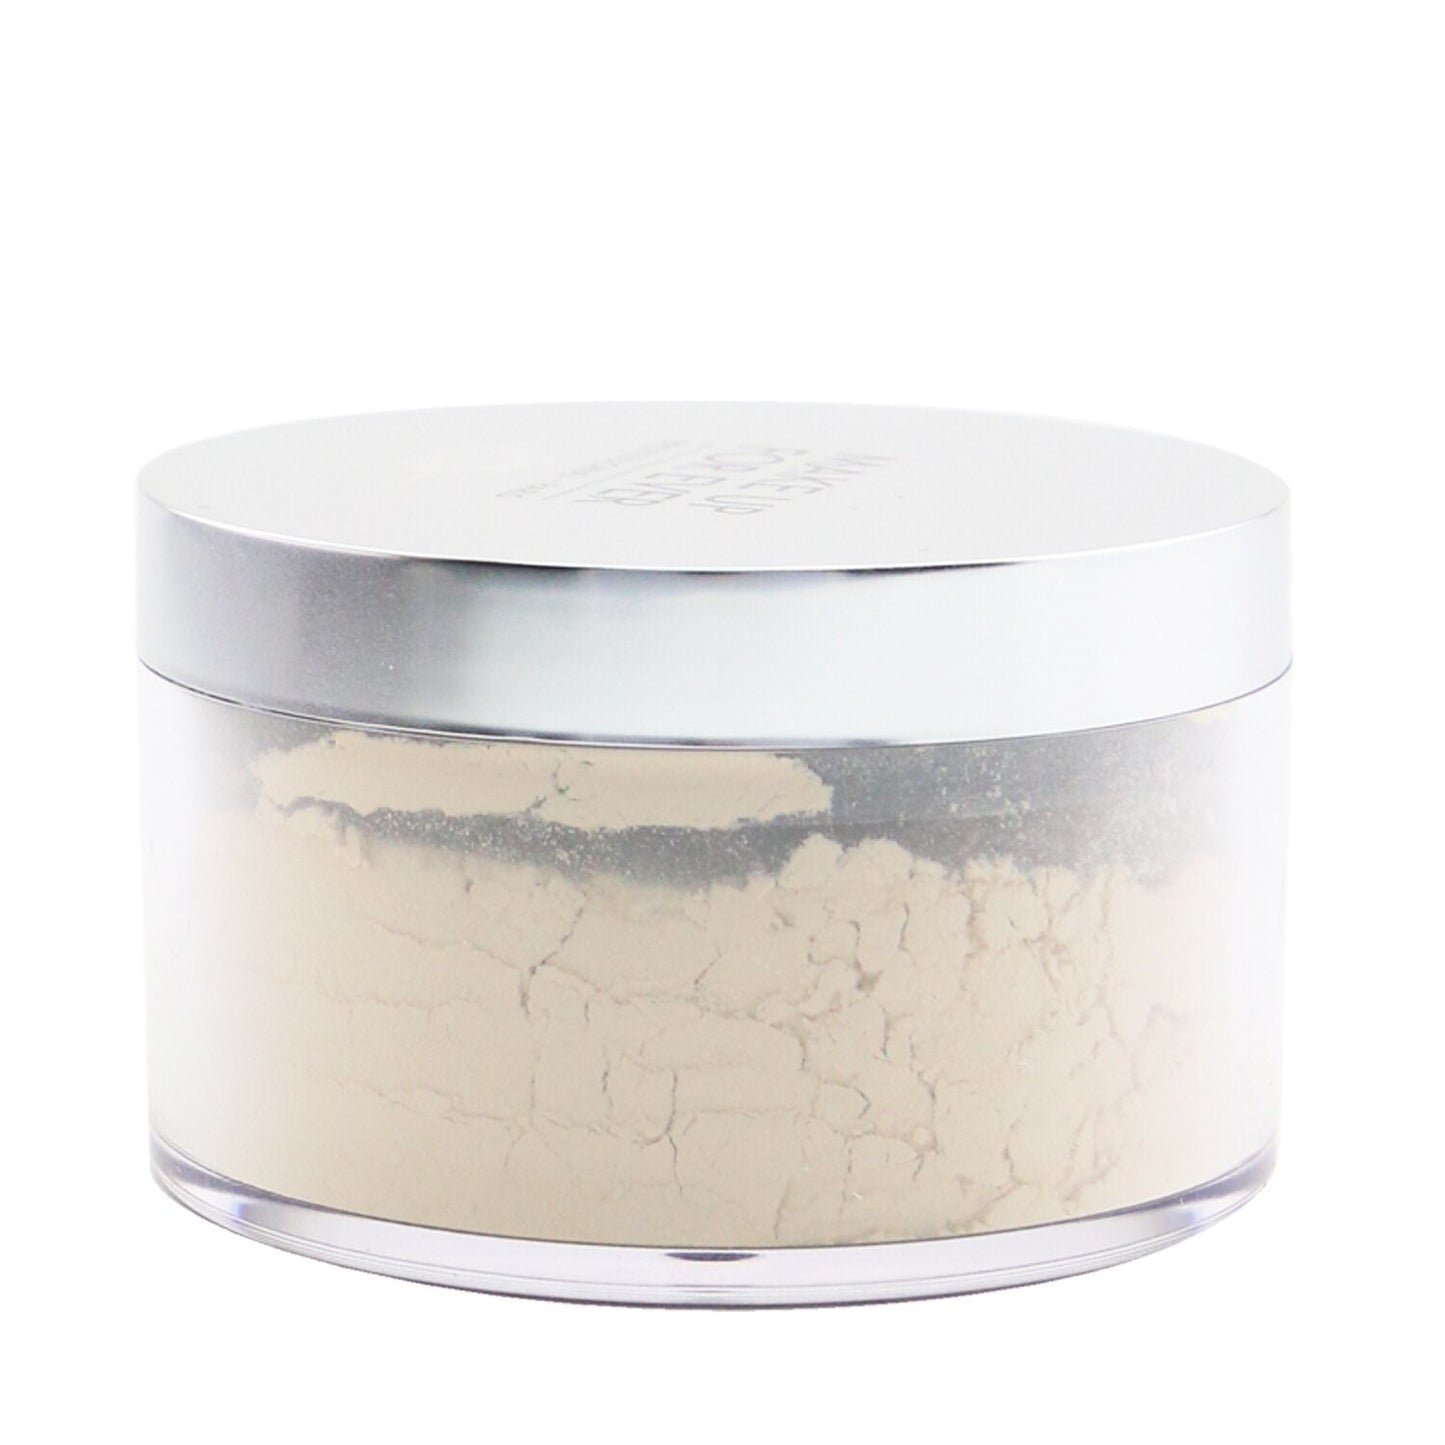 MAKE UP FOR EVER - Ultra HD Invisible Micro Setting Loose Powder - # 2.2 Light Neutral I000018622 / 174824 16g/0.56oz